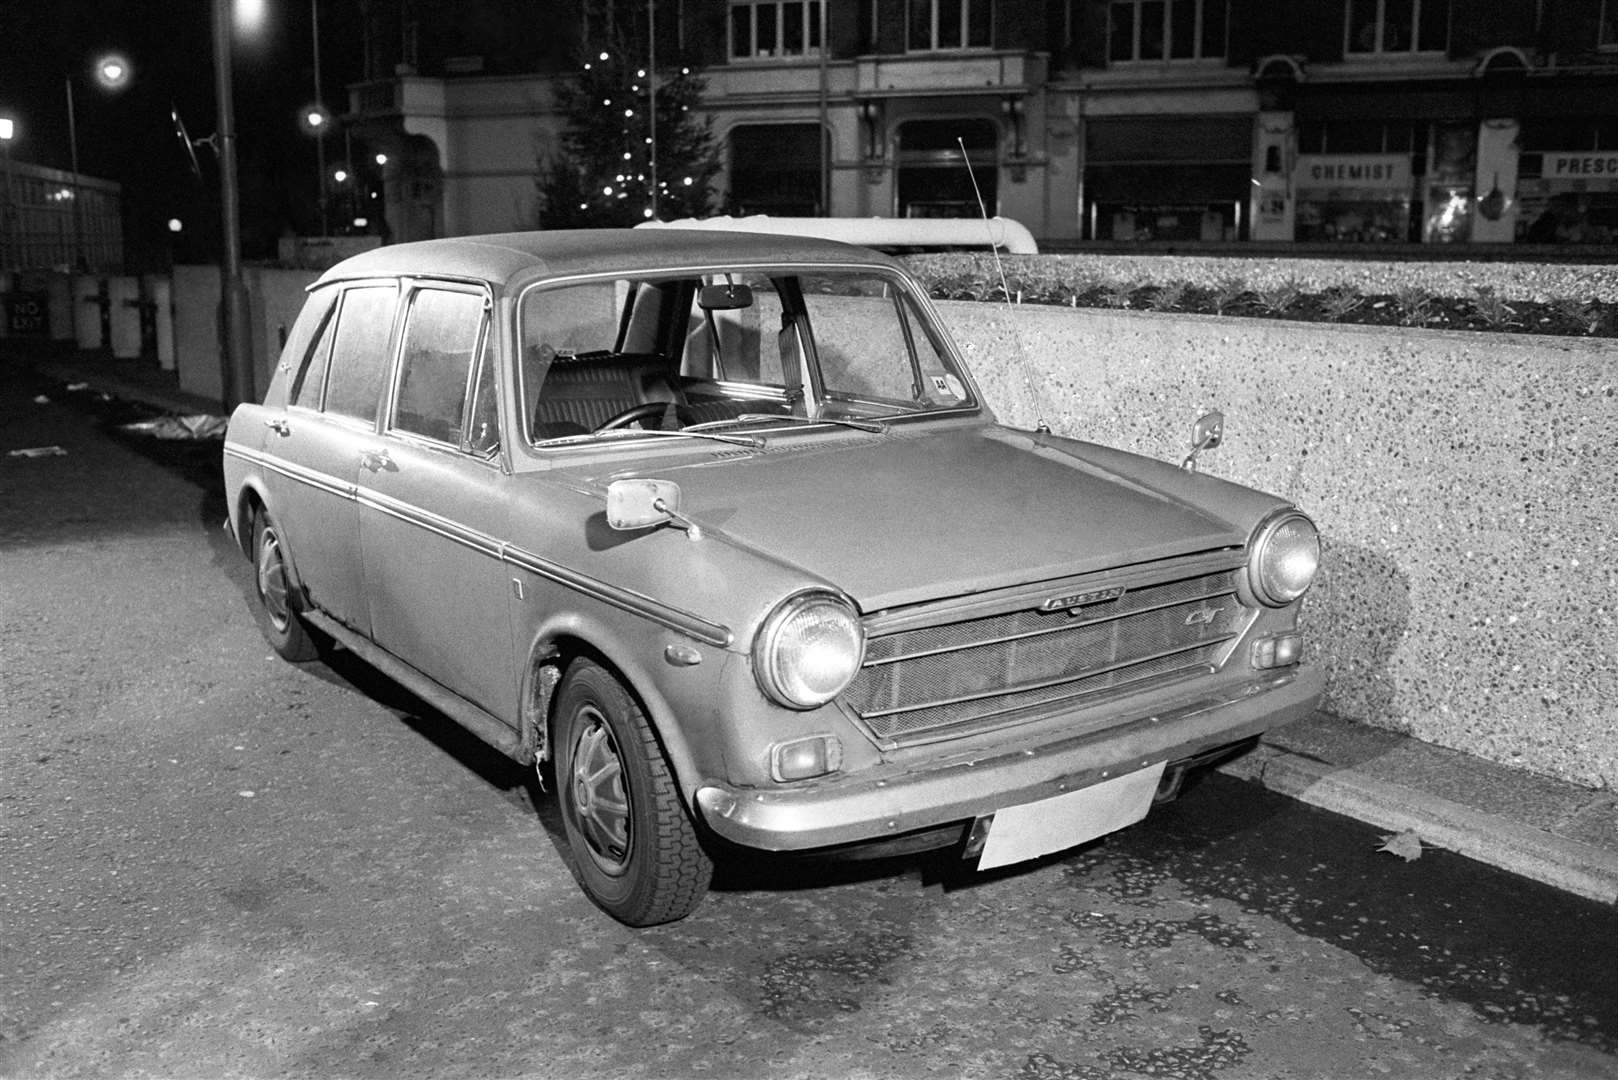 A 1972 blue Austin 1100 saloon with a black vinyl roof similar to the one used in the Harrods car bomb attack (PA)